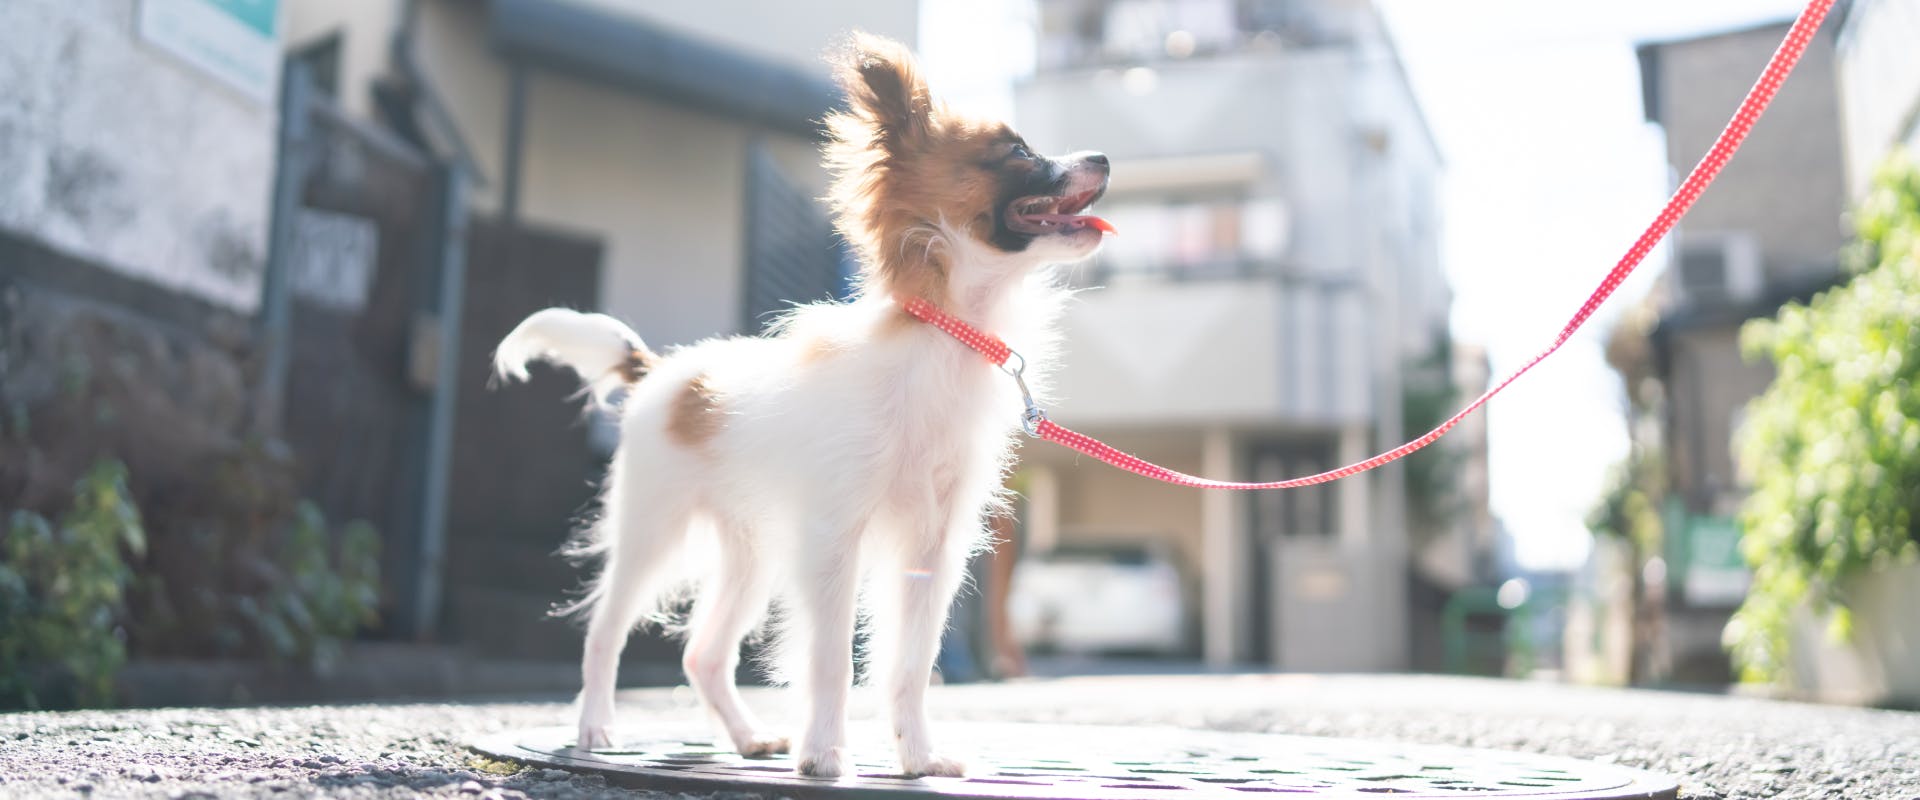 small dog on a led stood in a japanese street